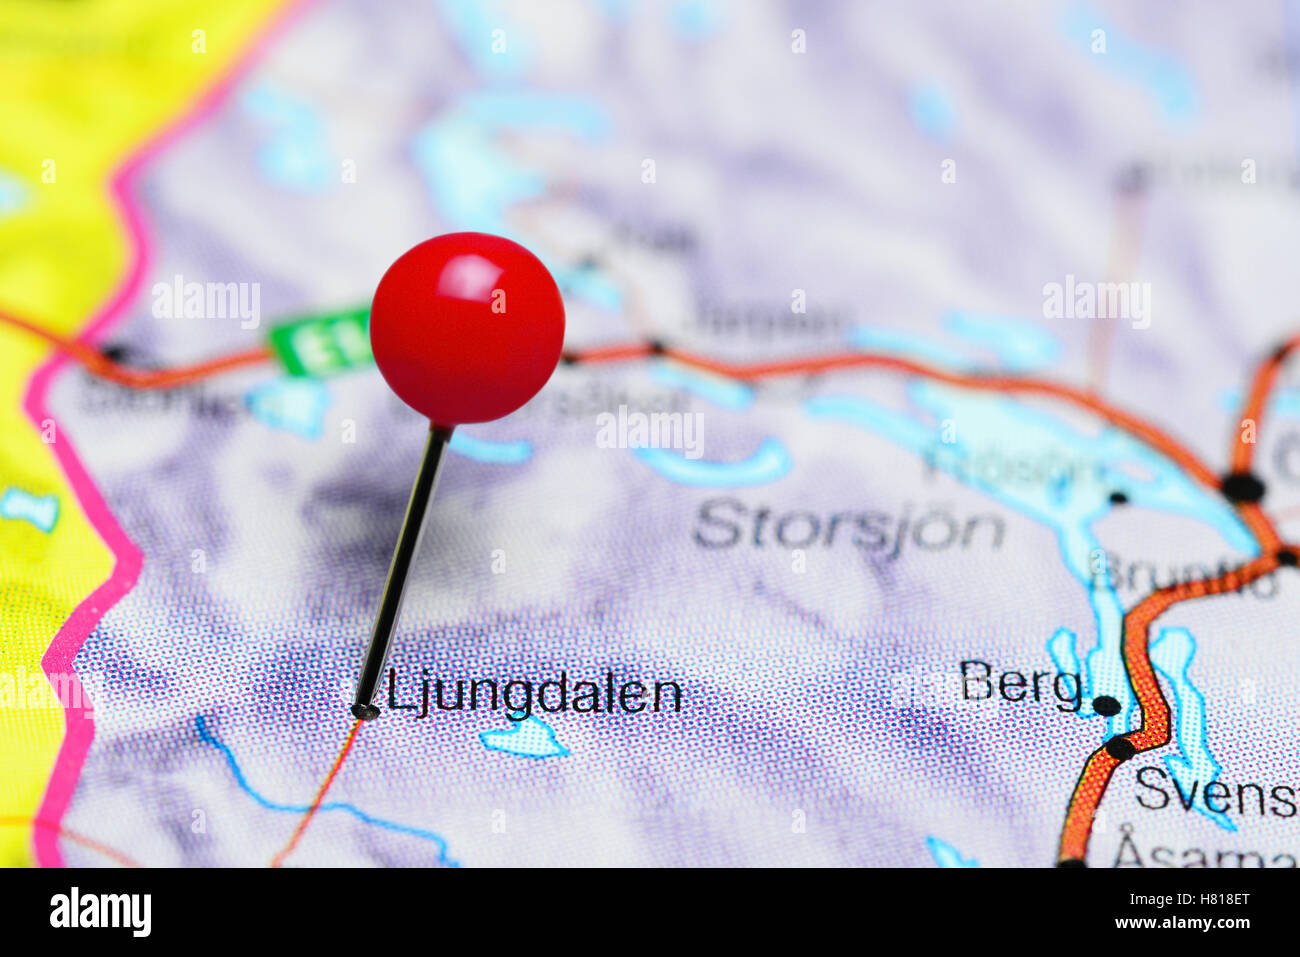 Ljungdalen pinned on a map of Sweden Stock Photo